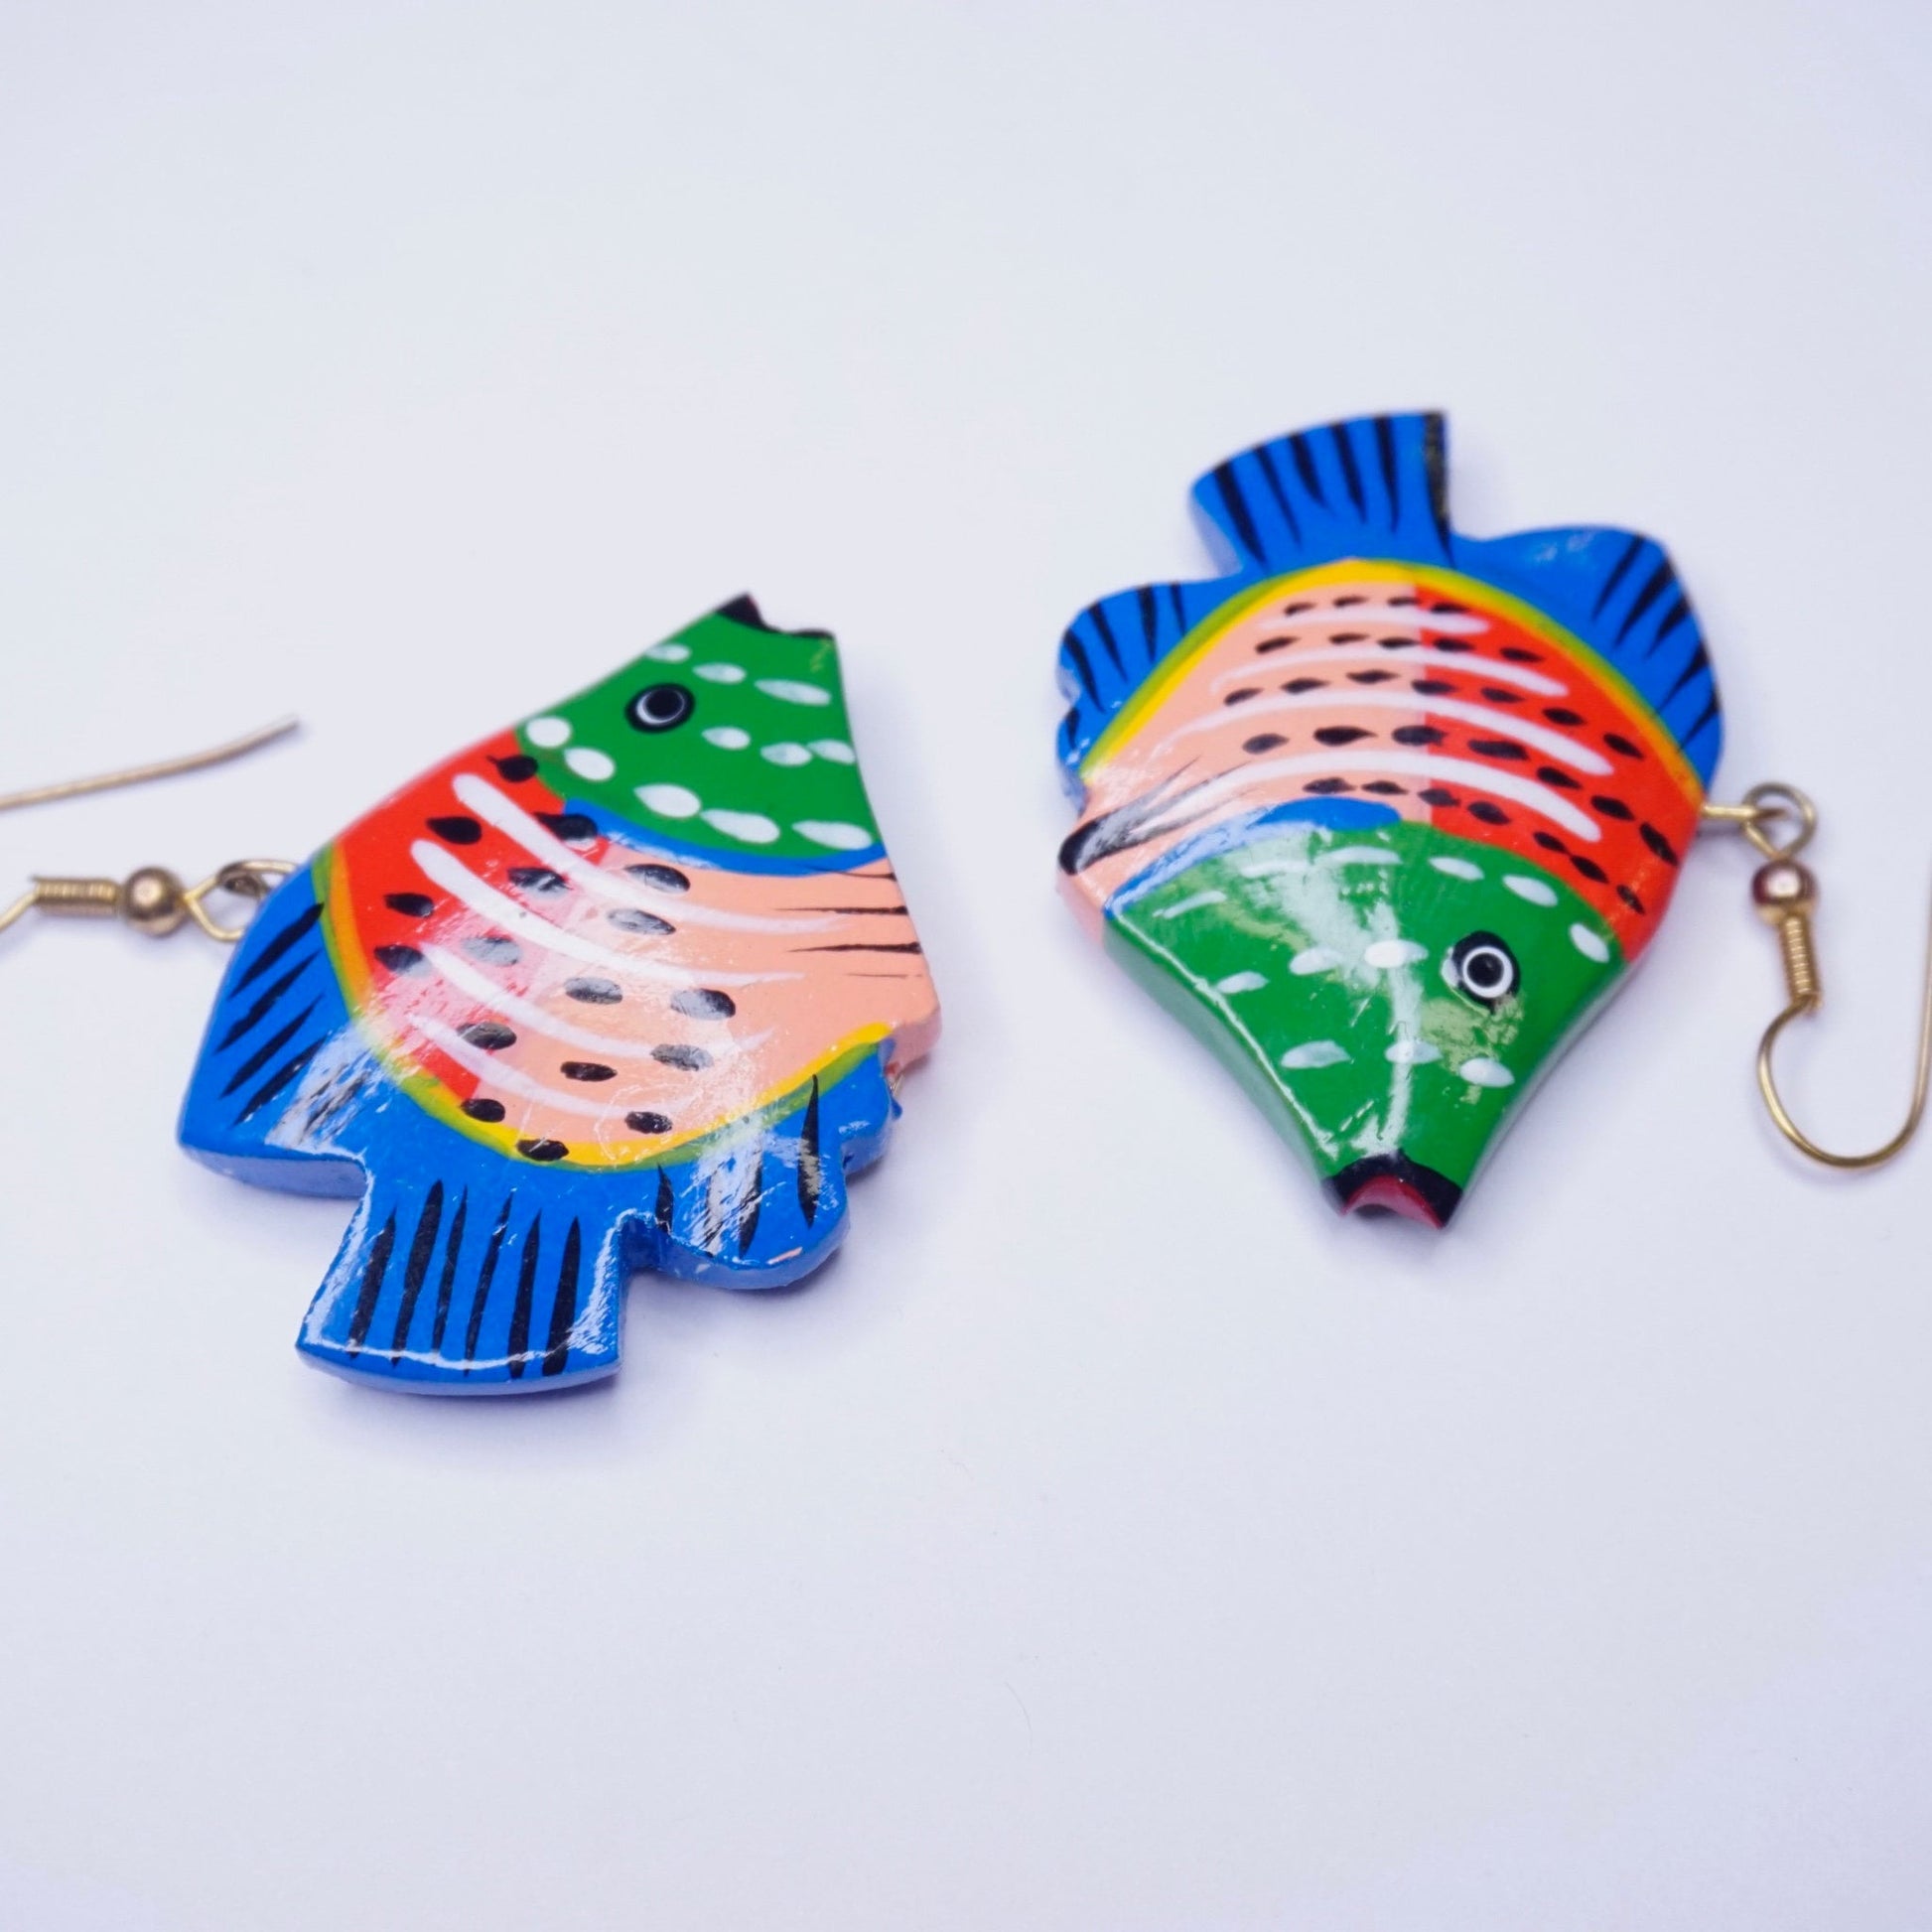 Vintage wood carved fish earrings with colorful painted details on a white background, handmade wooden dangle earrings with cute statement design.